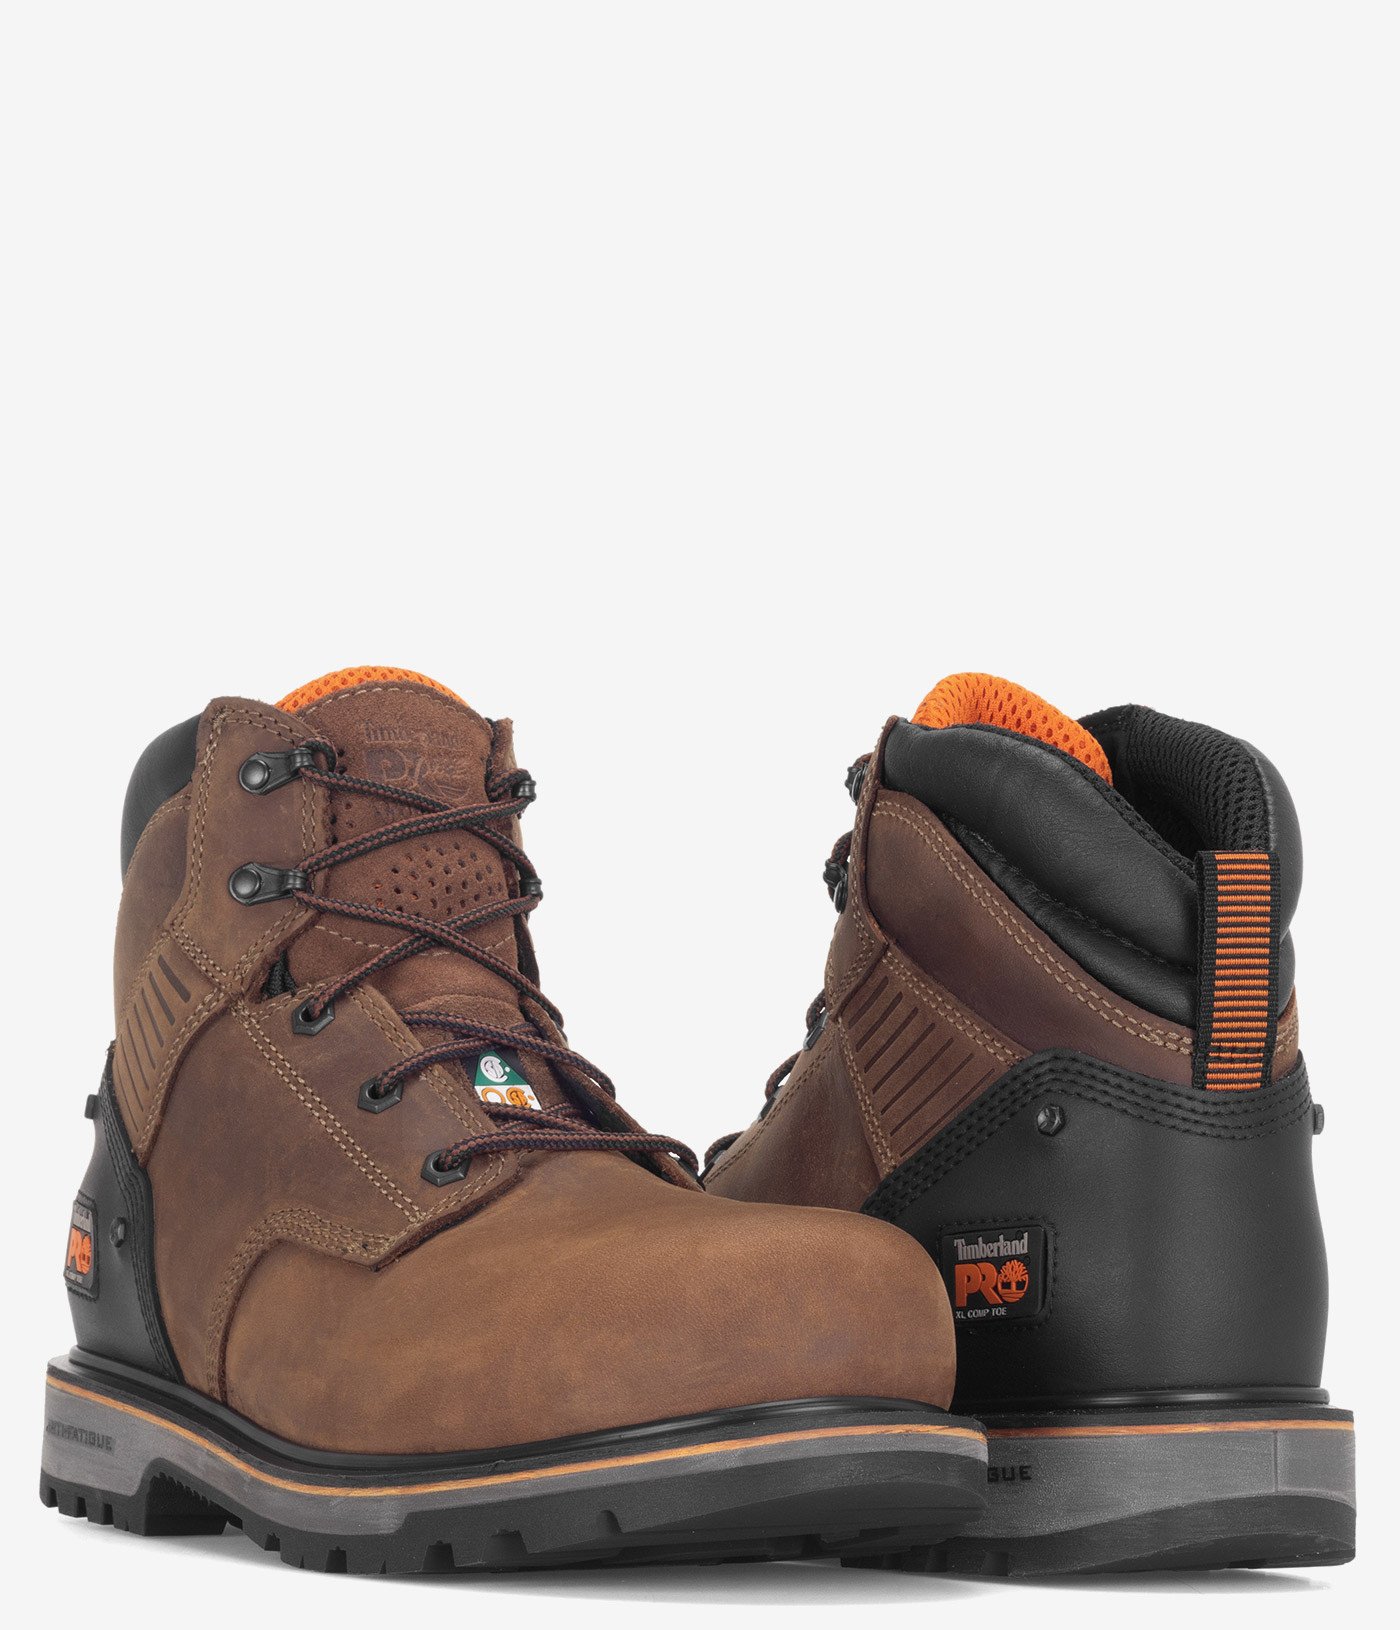 Timberland PRO Ballast 6" Composite Safety Toe PR Boot